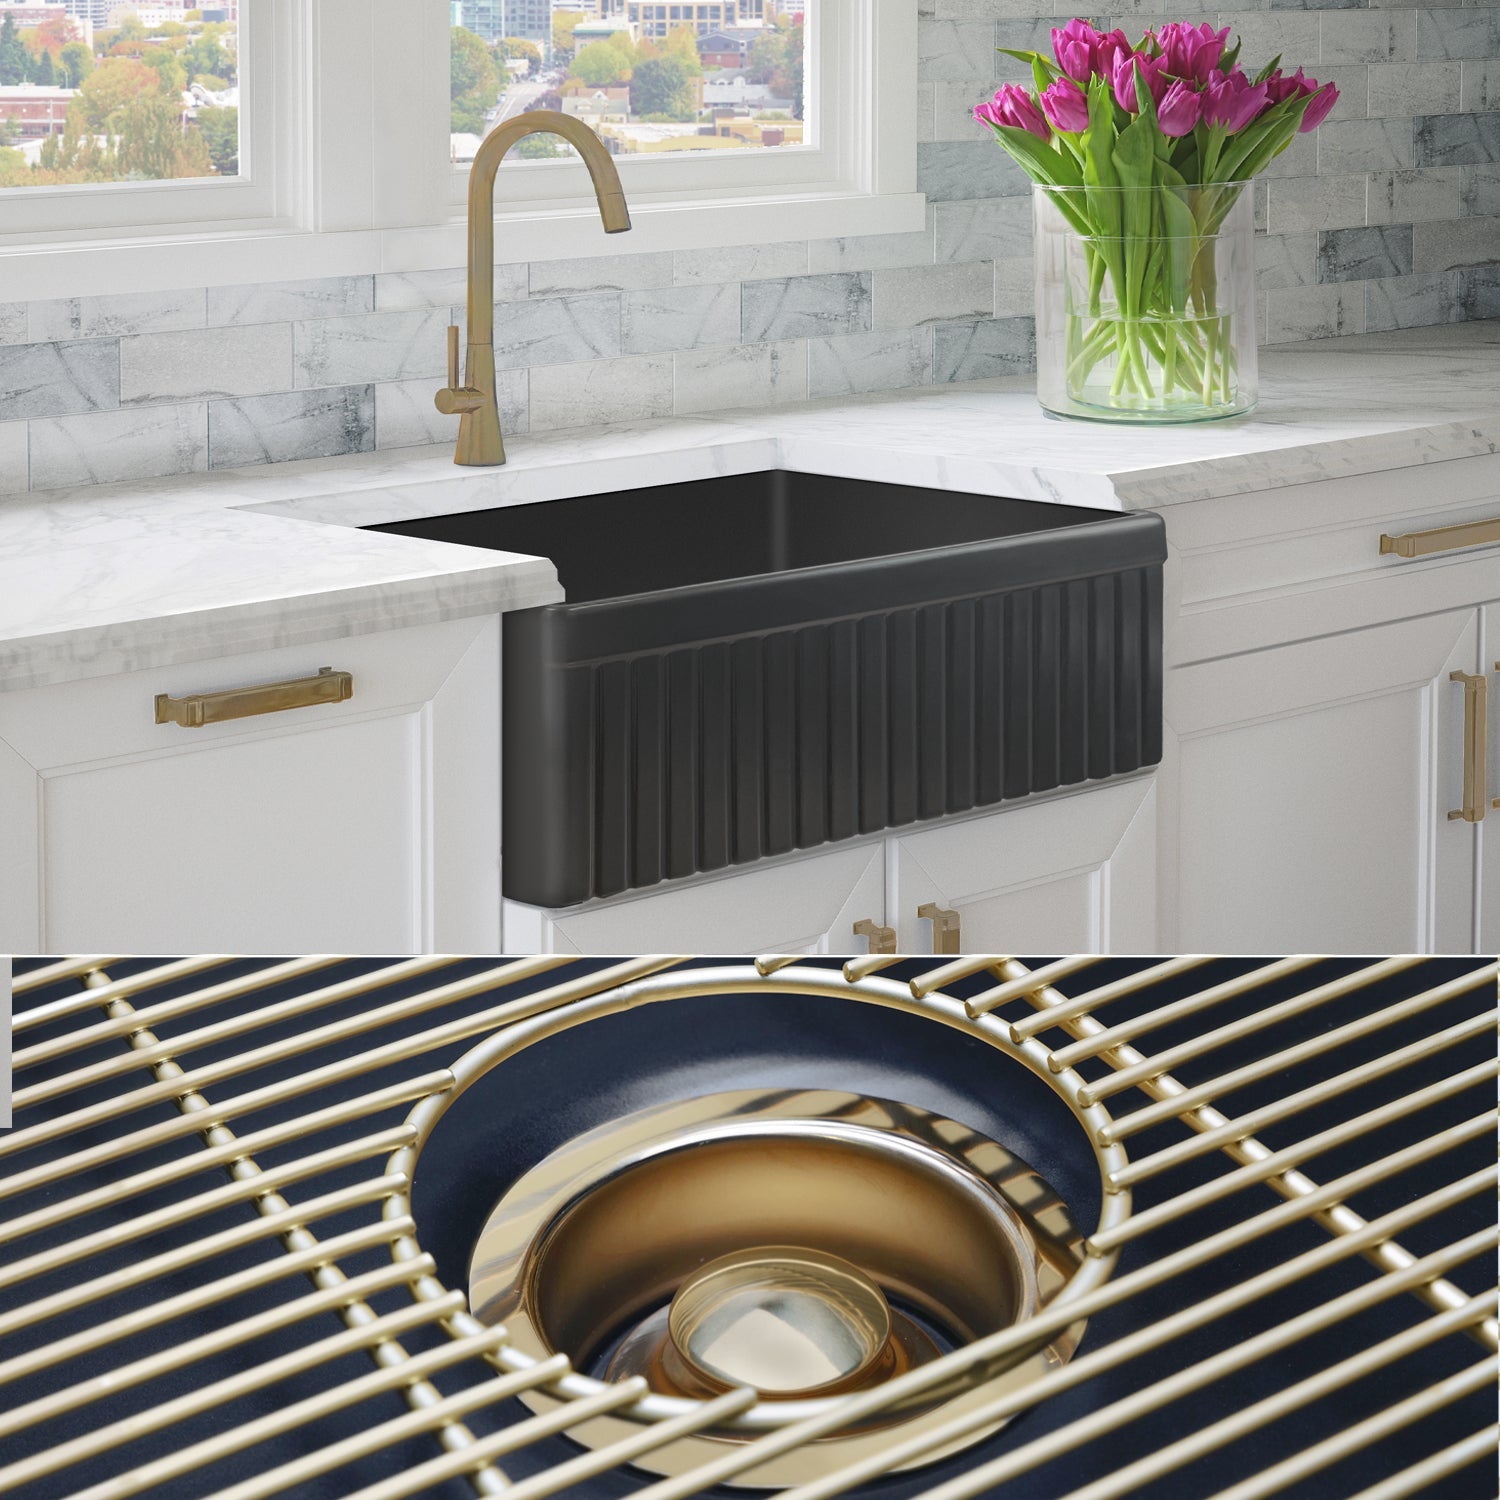 FSW1027BB LUXURY 33-INCH SOLID FIRECLAY FARMHOUSE SINK, MATTE BLACK, MATTE GOLD ACCS, FLUTED FRONT